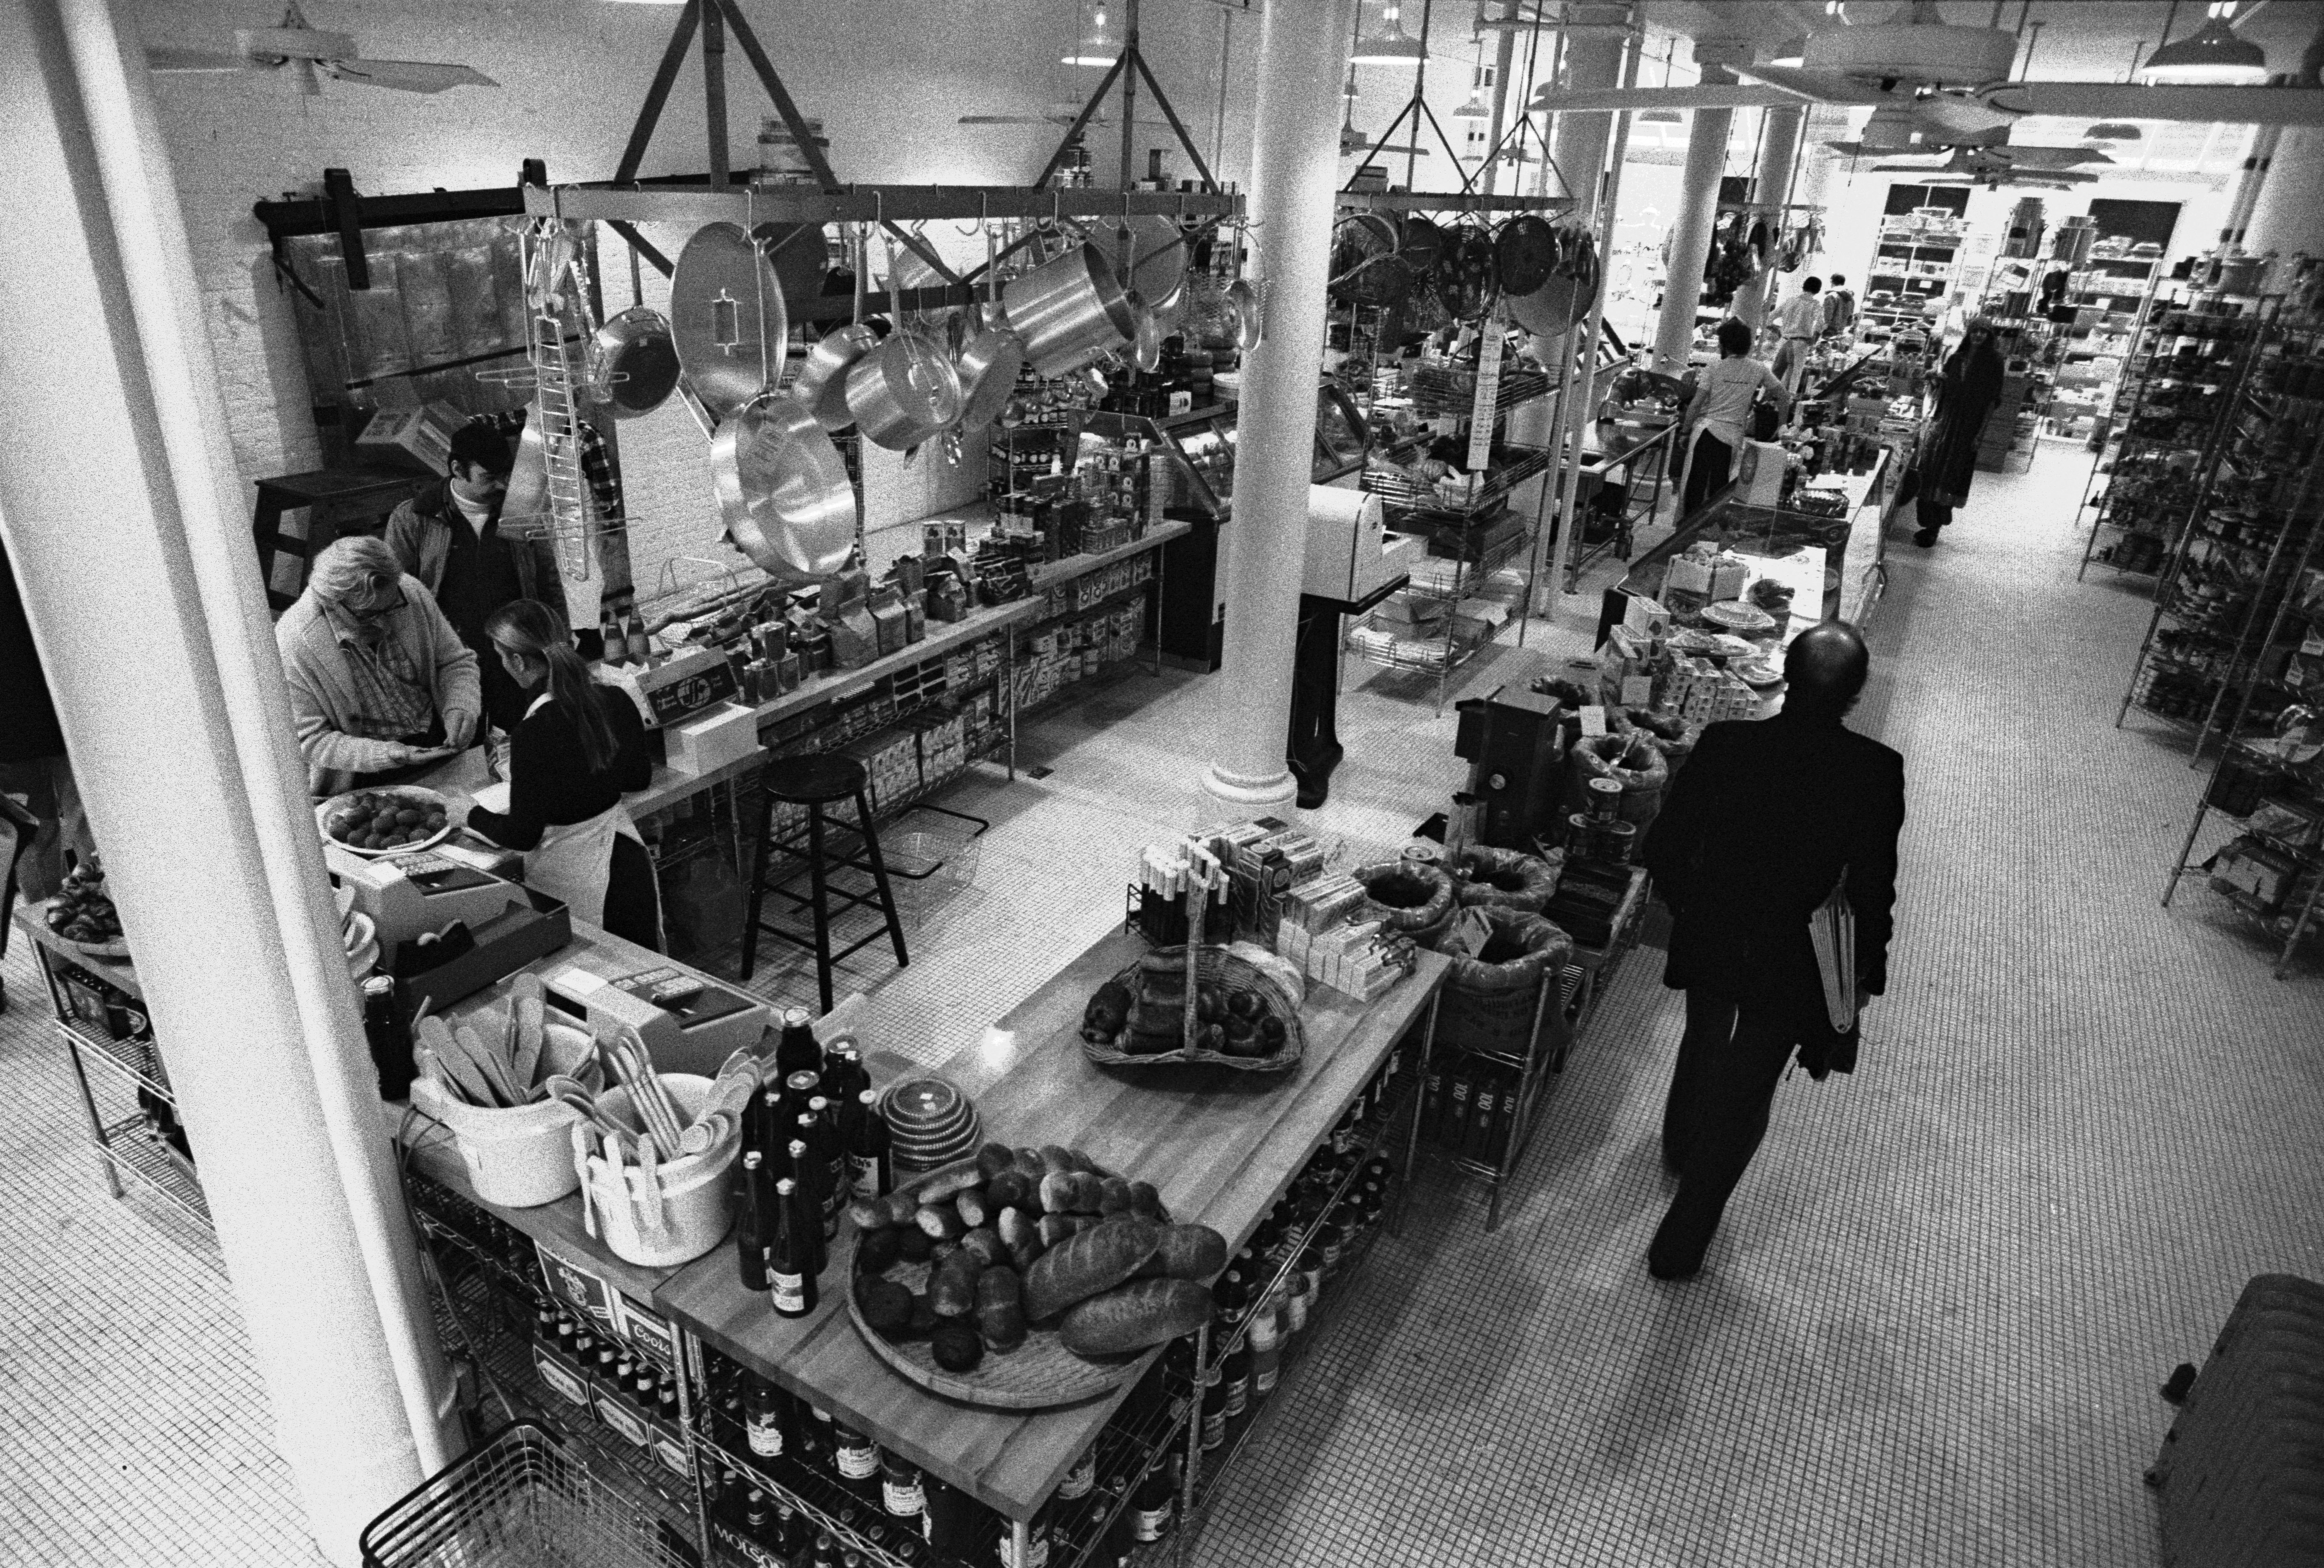 Elevated view inside the first Dean and DeLuca grocery store photographed in black and white with silver pots and pans hanging from the ceiling above a rectangular butcher block counter with baskets full of bread